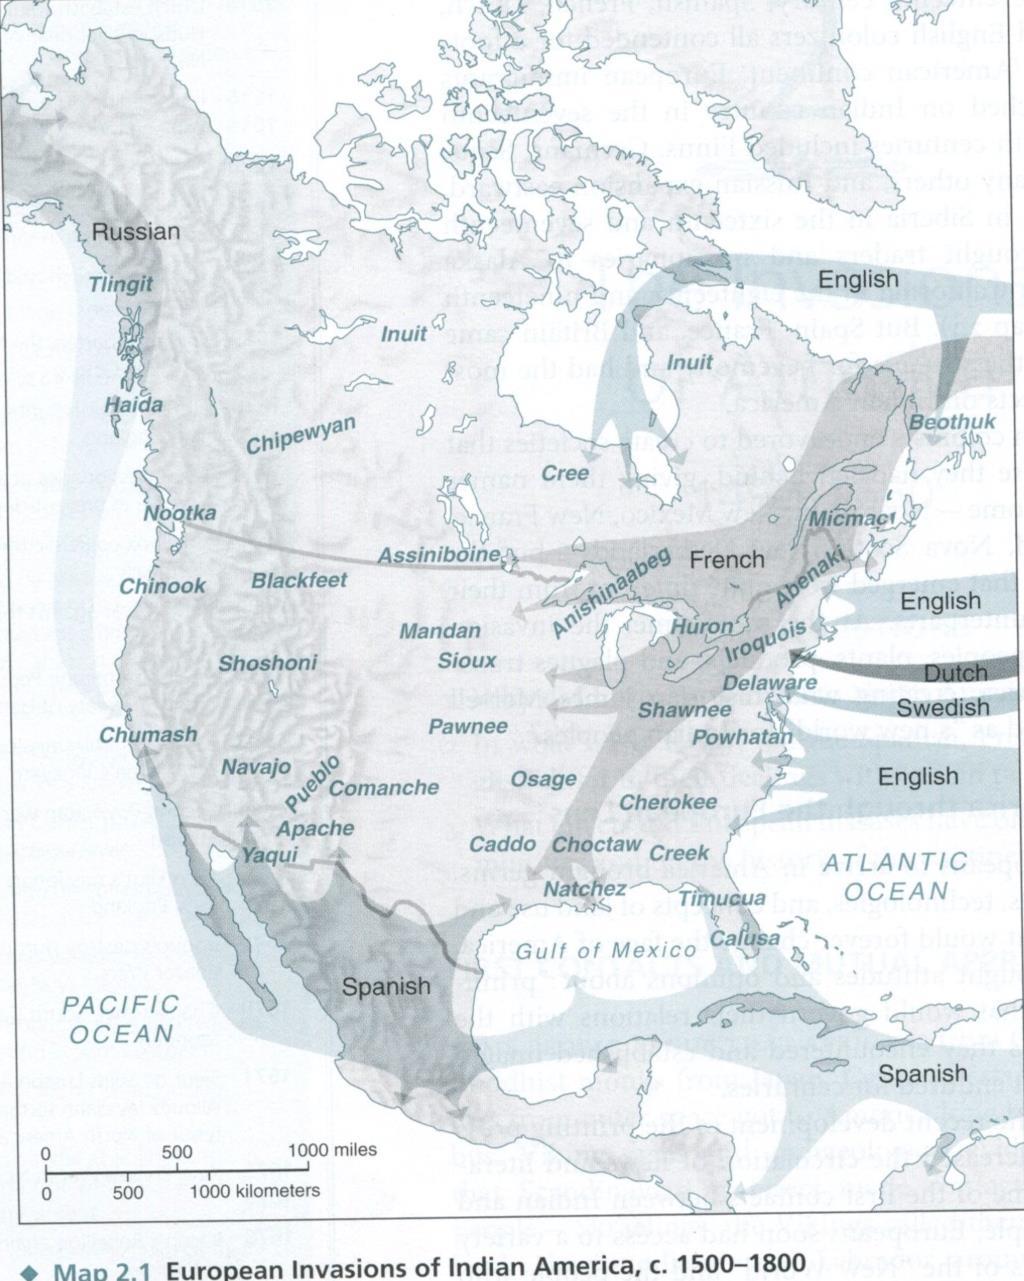 European Relations with the Iroquois From the beginning of European expansion into northeast North America, the Iroquois was a force to be reckoned with.